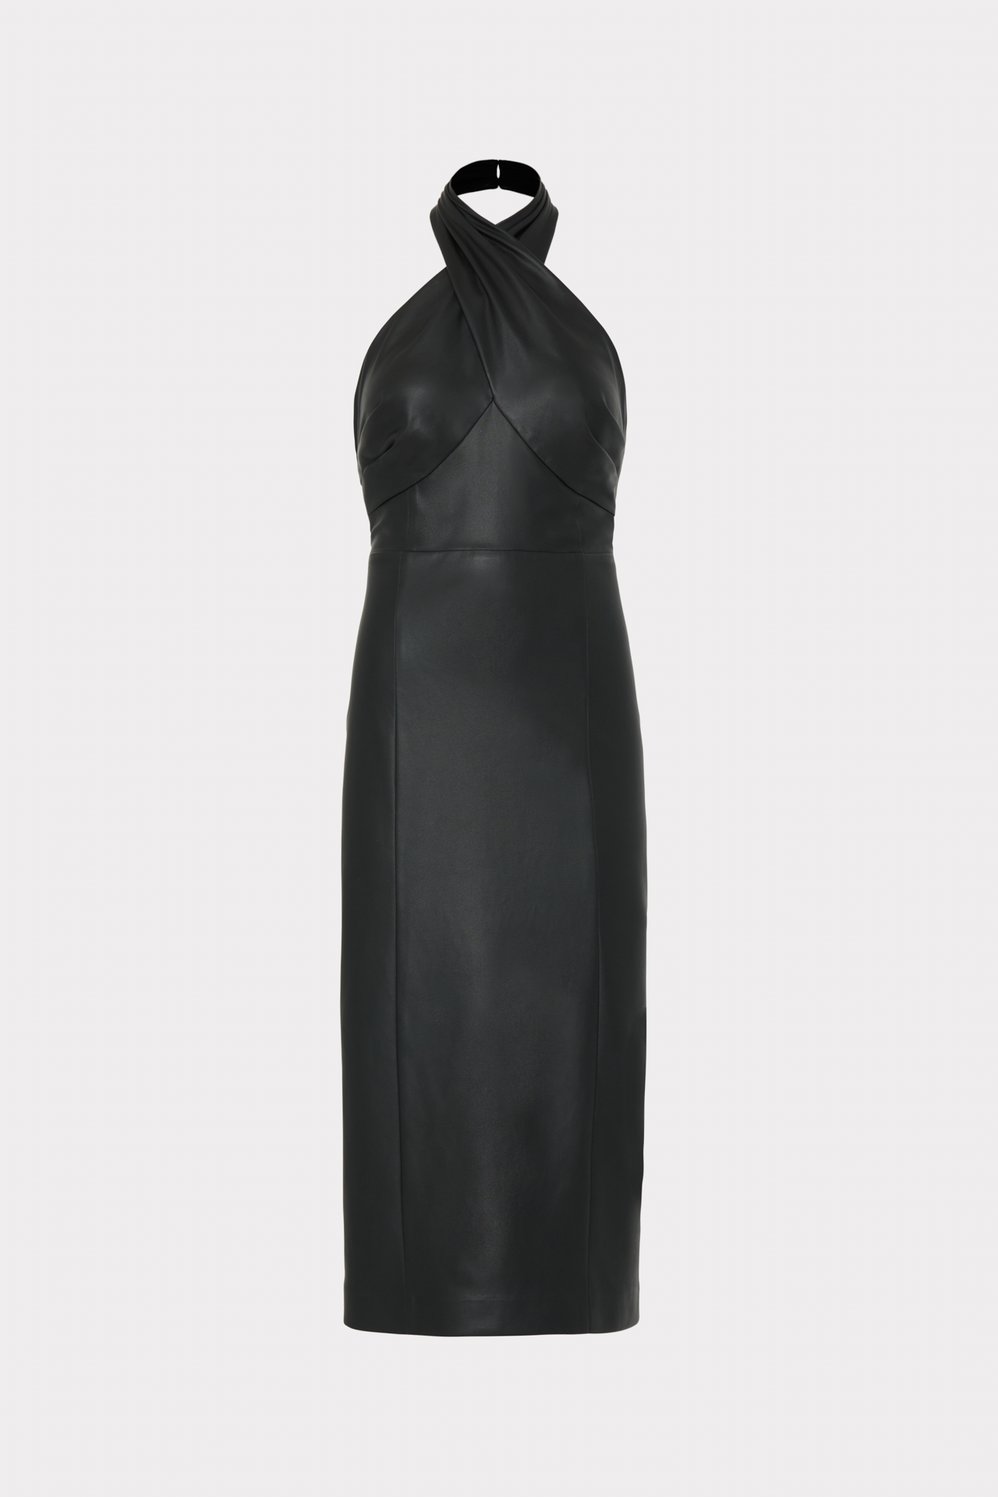 Shop the Raven Vegan Leather Dress from MILLY